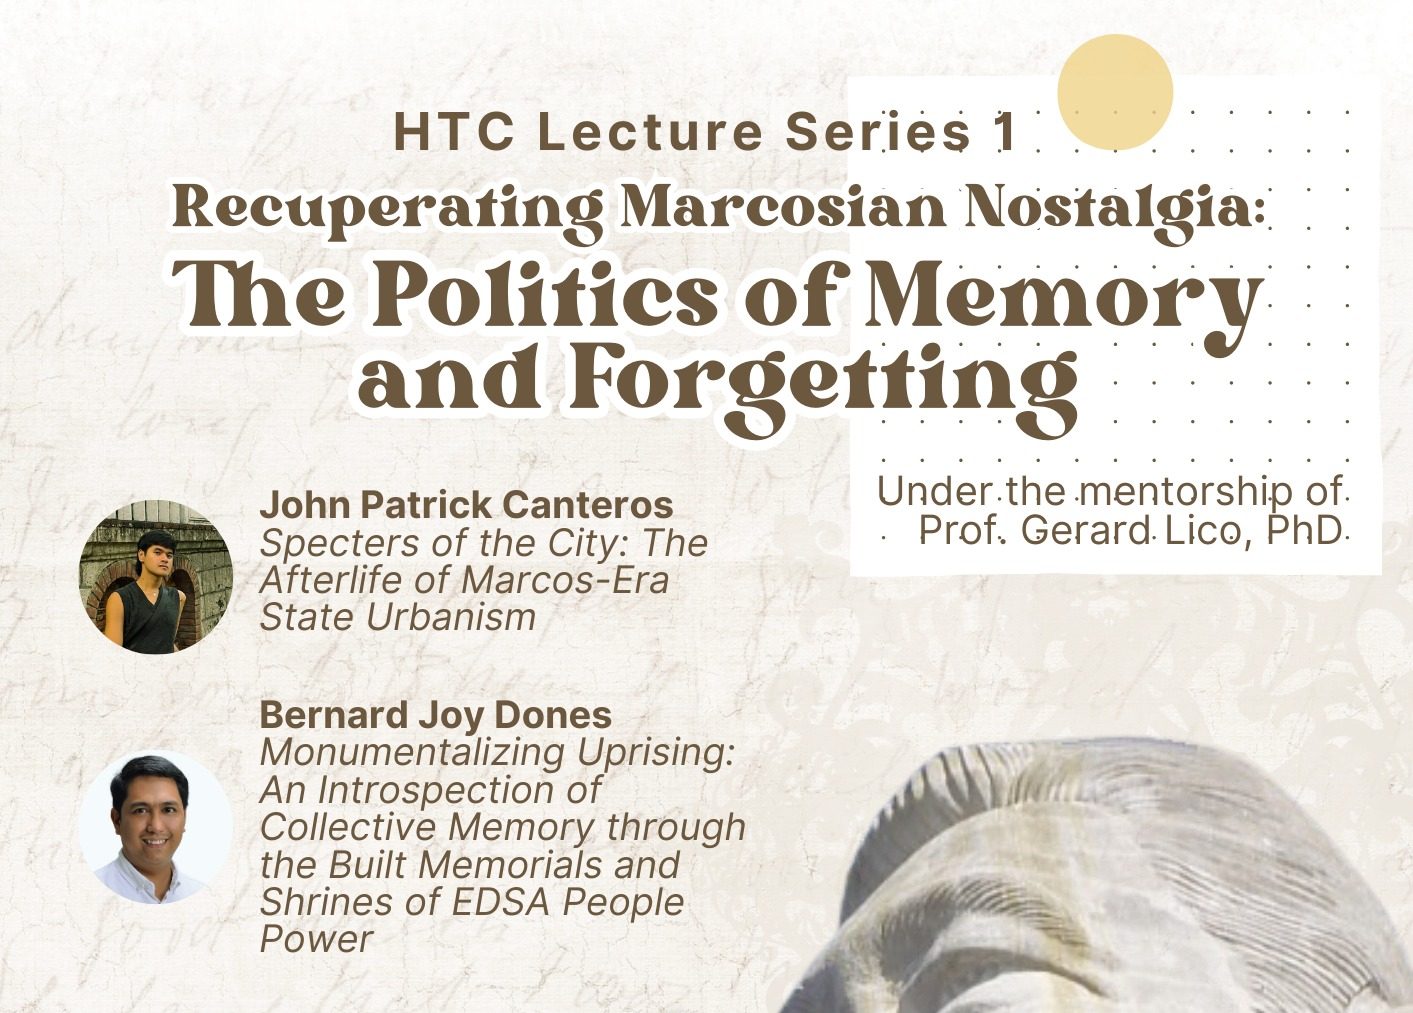 Recuperating Marcosian Nostalgia: The Politics of Memory and Forgetting